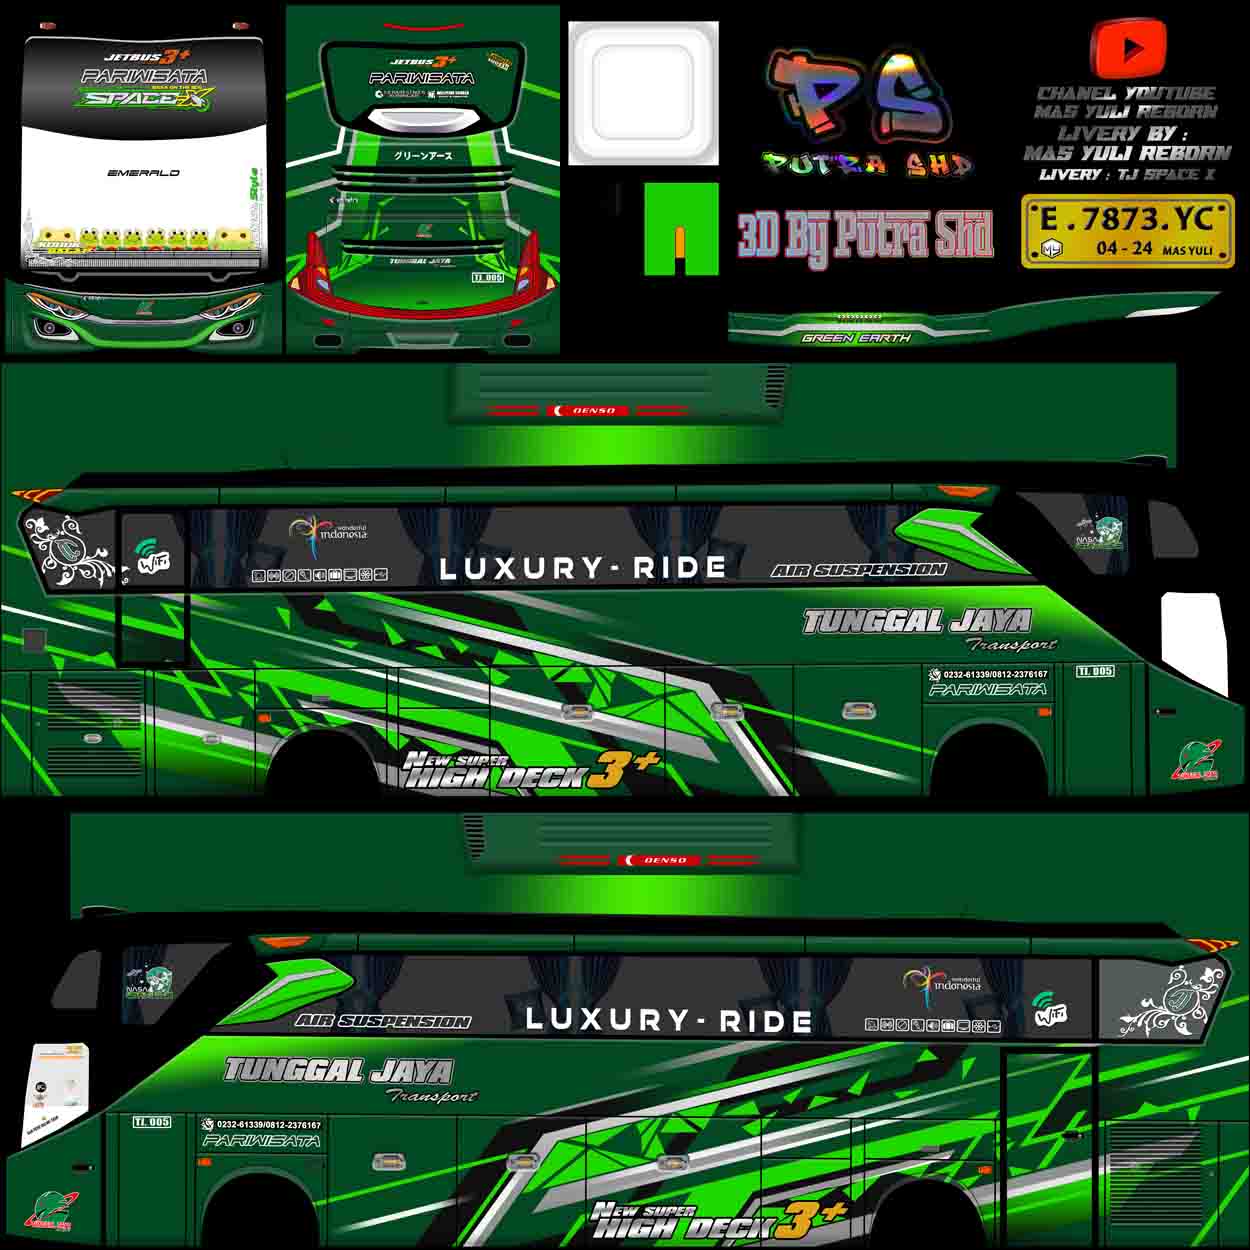 download livery bussid tunggal jaya spacex